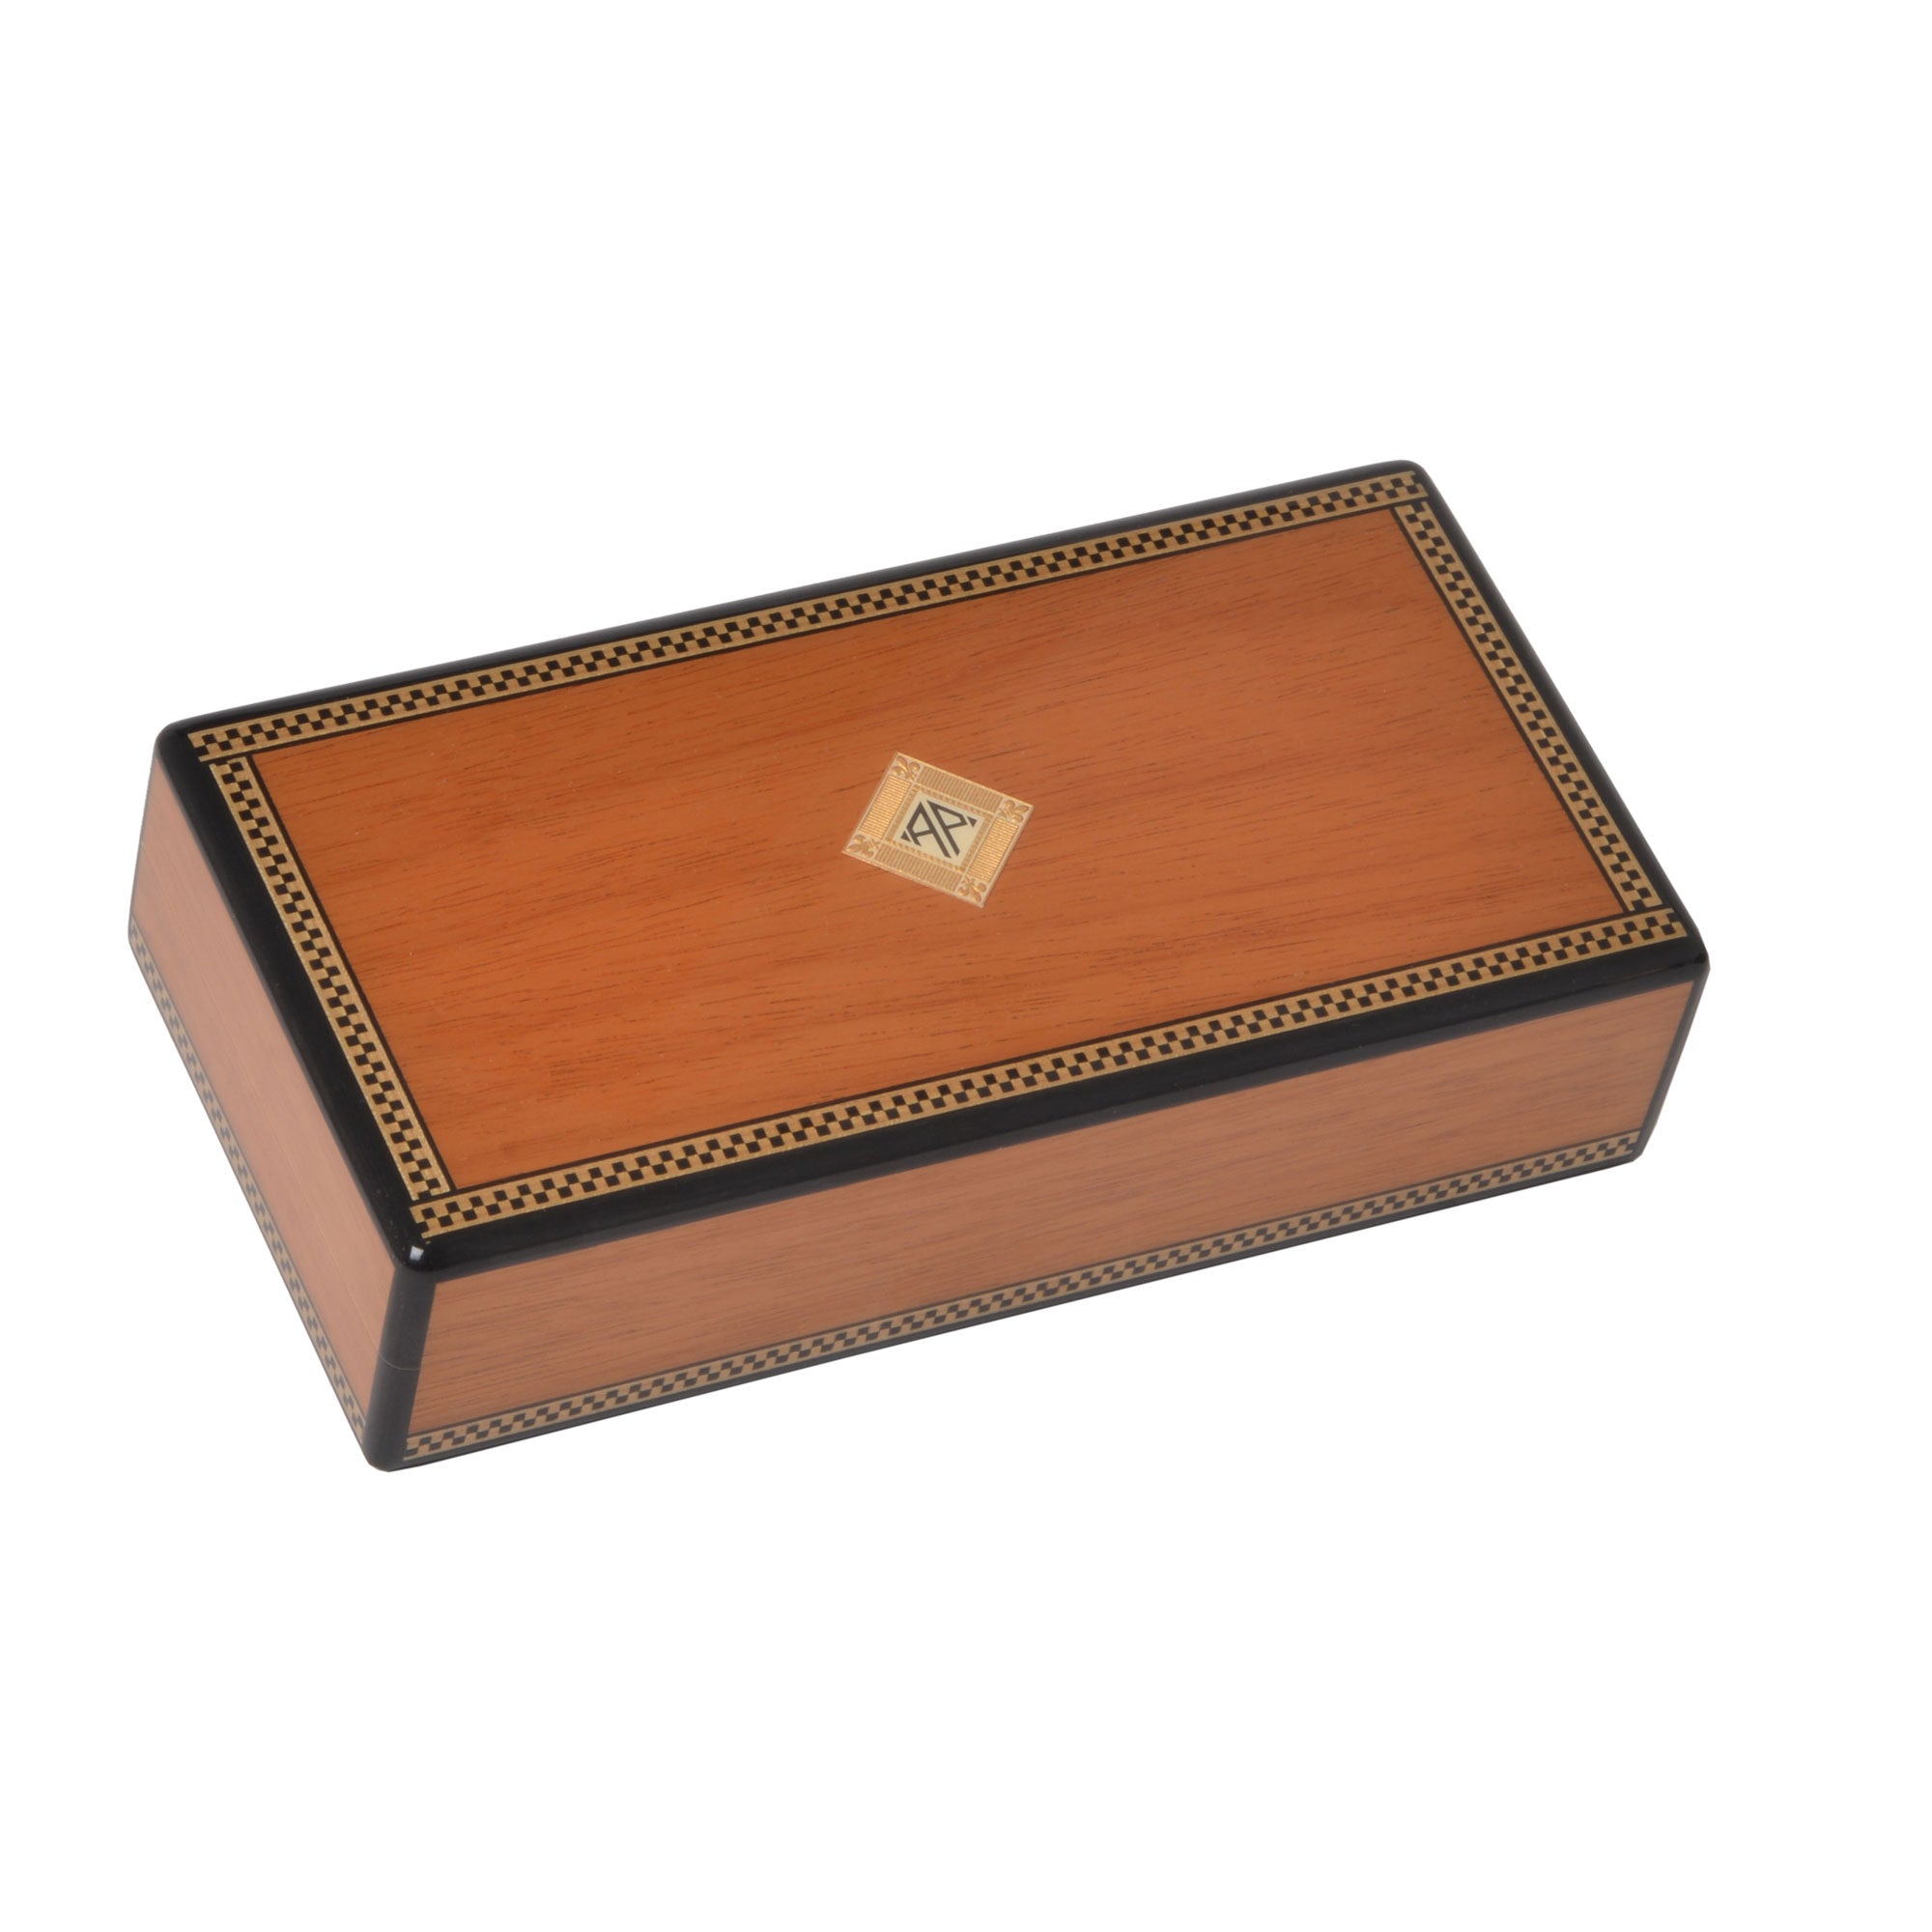 "Classique" - Box for 8 rings or 8 pairs of cufflinks